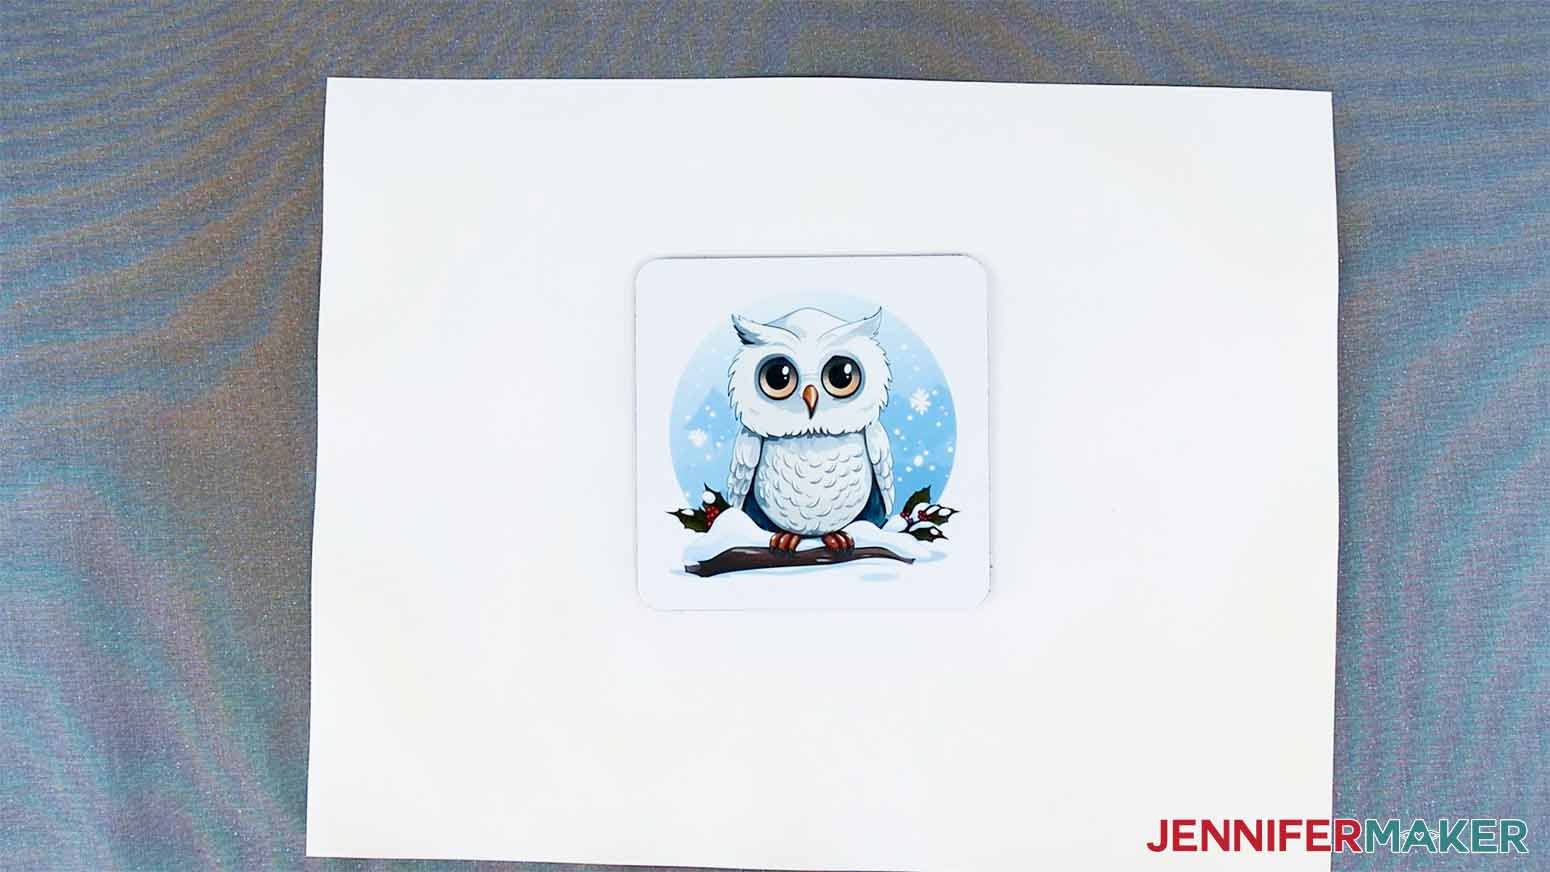 Finished sqaure Cricut coaster with winter owl sublimation design.